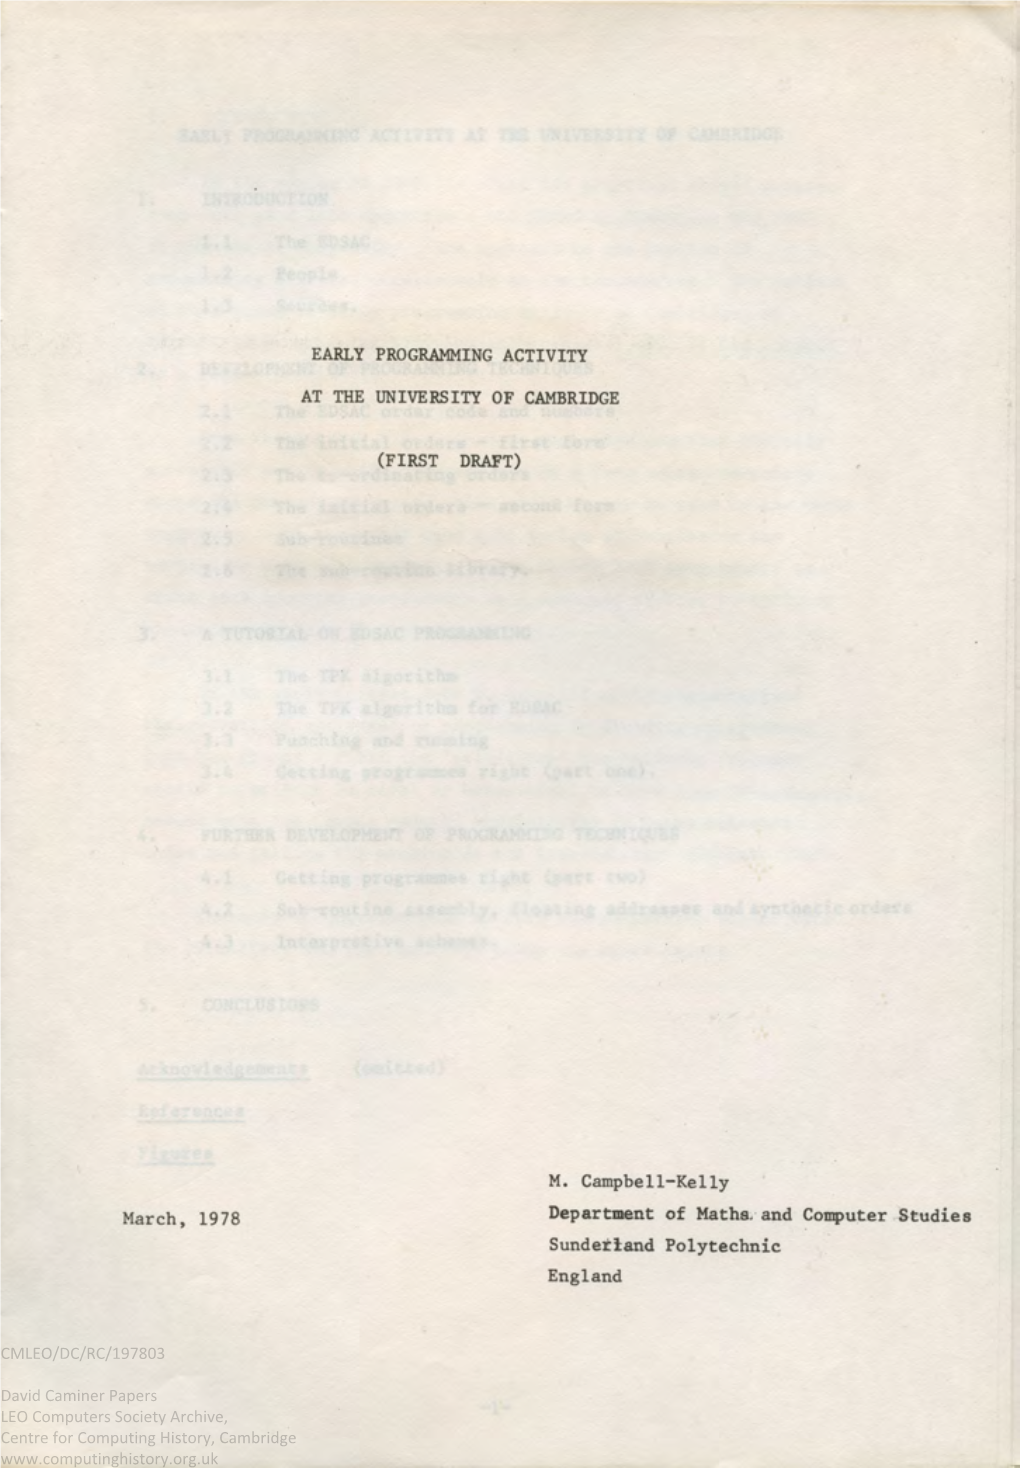 Early Programming Activity at the University of Cambridge (Mar 1978)